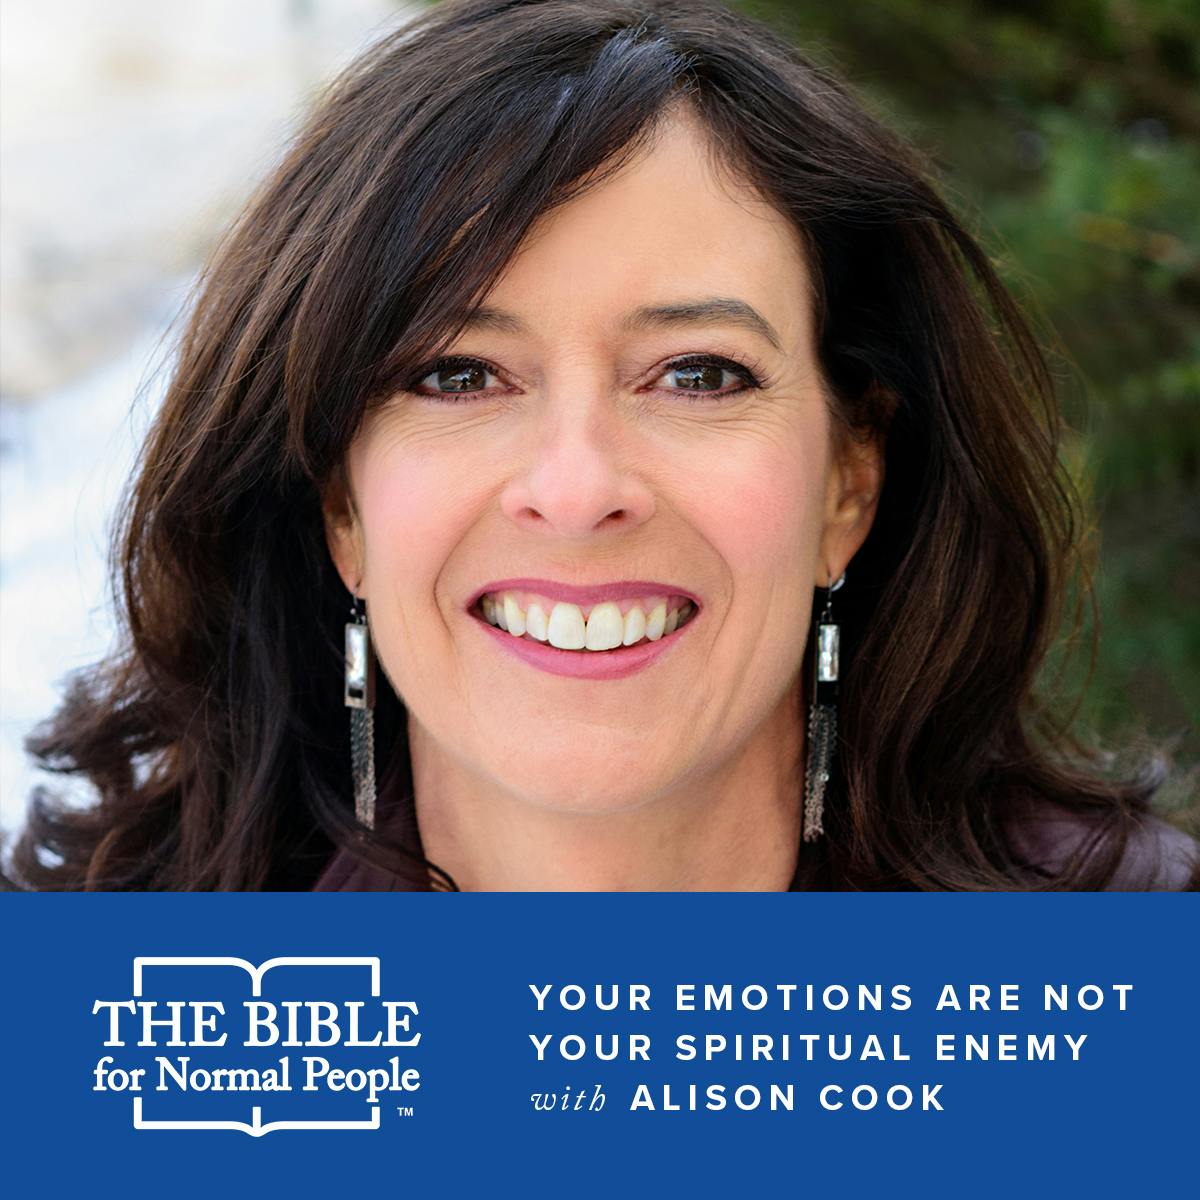 Episode 115: Alison Cook - Your Emotions Are Not Your Spiritual Enemy